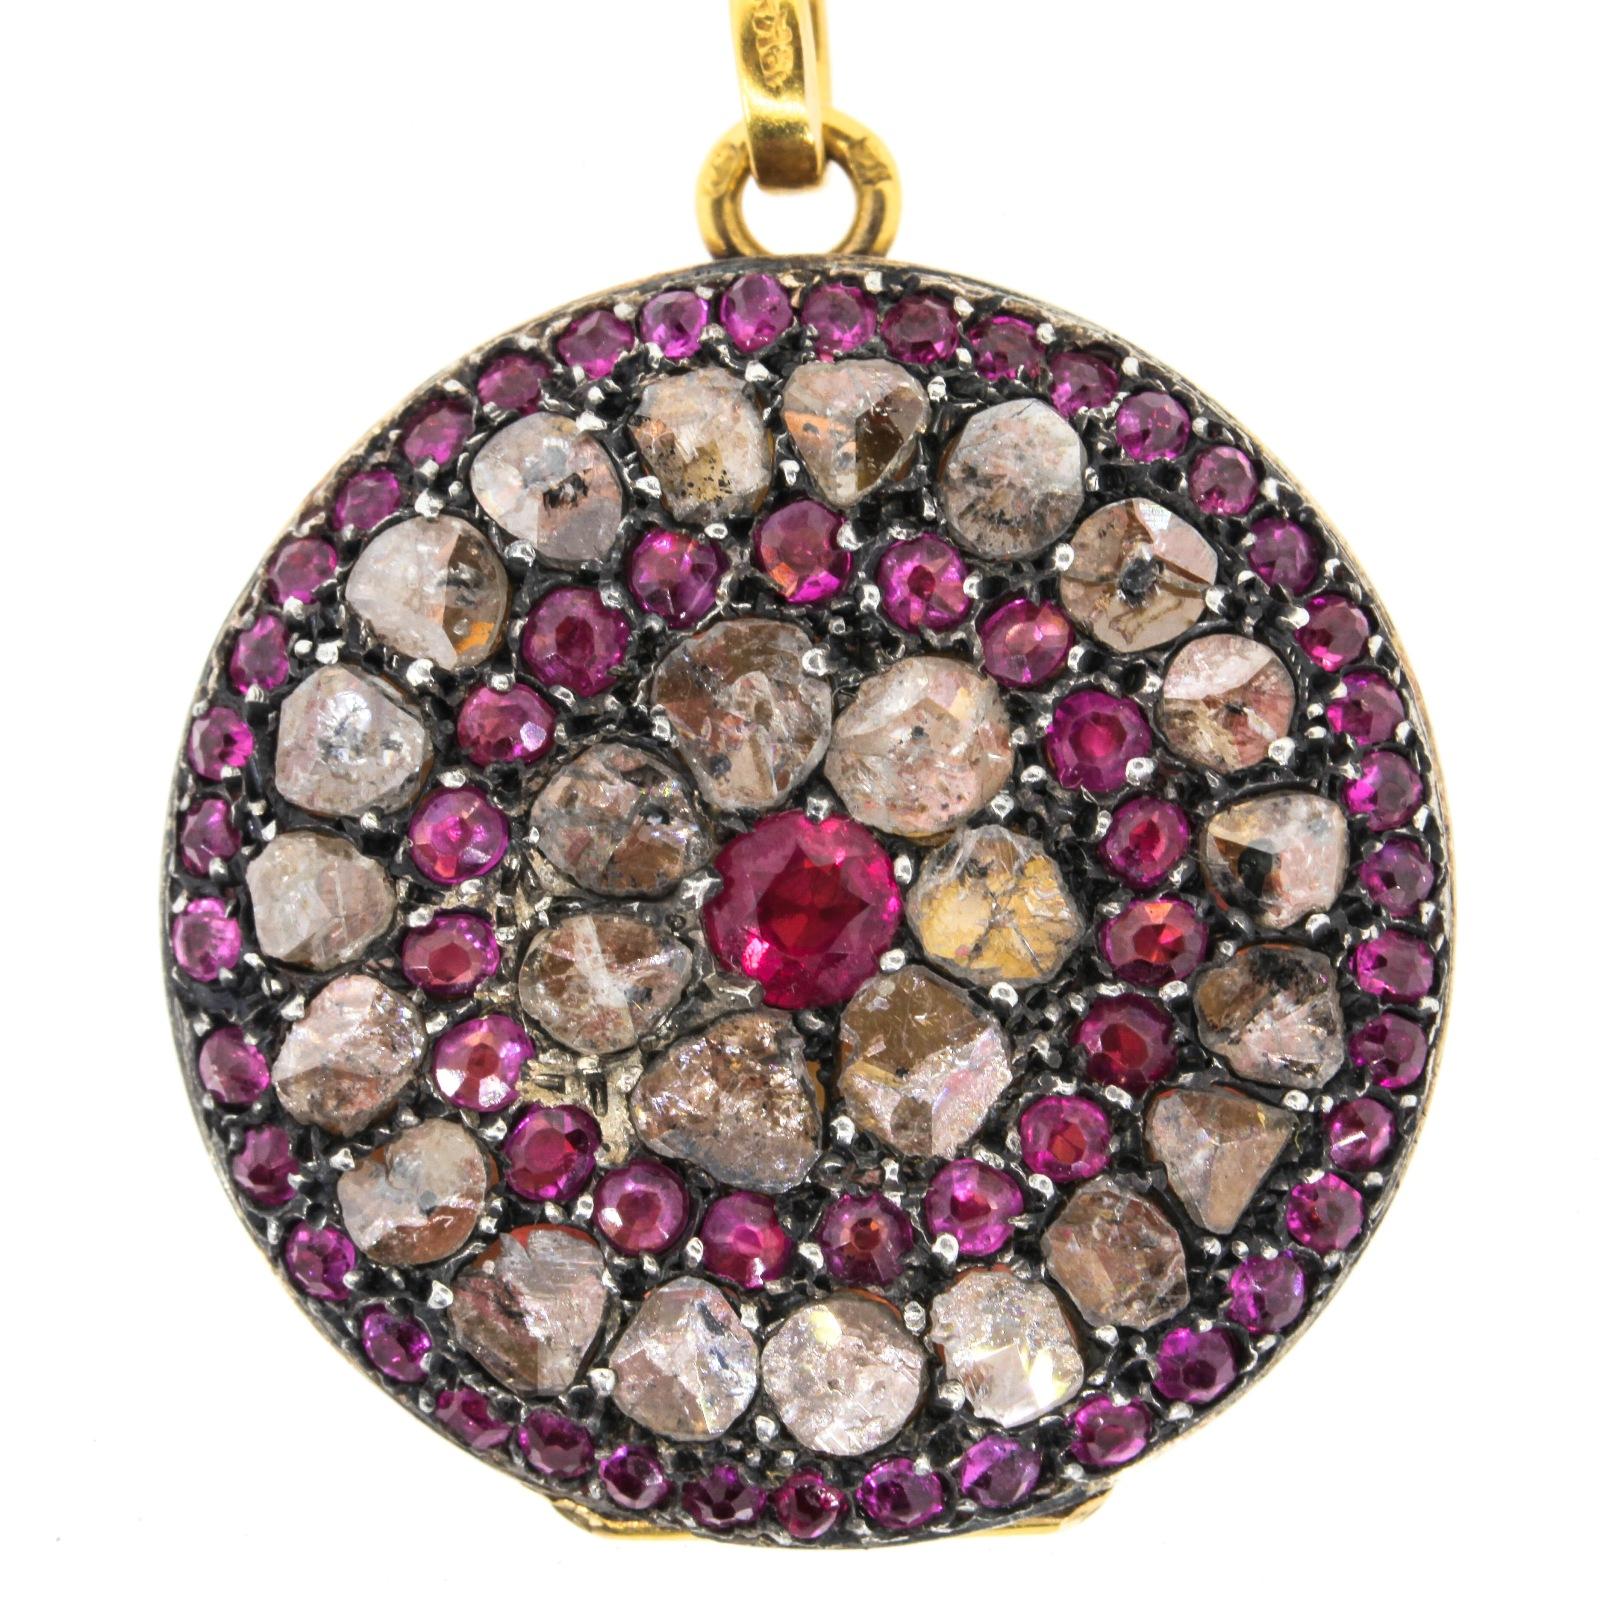 A gorgeous French circa 1900s 18KT yellow gold locket, adorned with sixty Burma Rubies weighing approximately 2.30 carats and 4.40 carats of rough and beautiful Rose Cut Diamonds.  The locket measures  1 1/4 inch in diameter, and the loop is marked